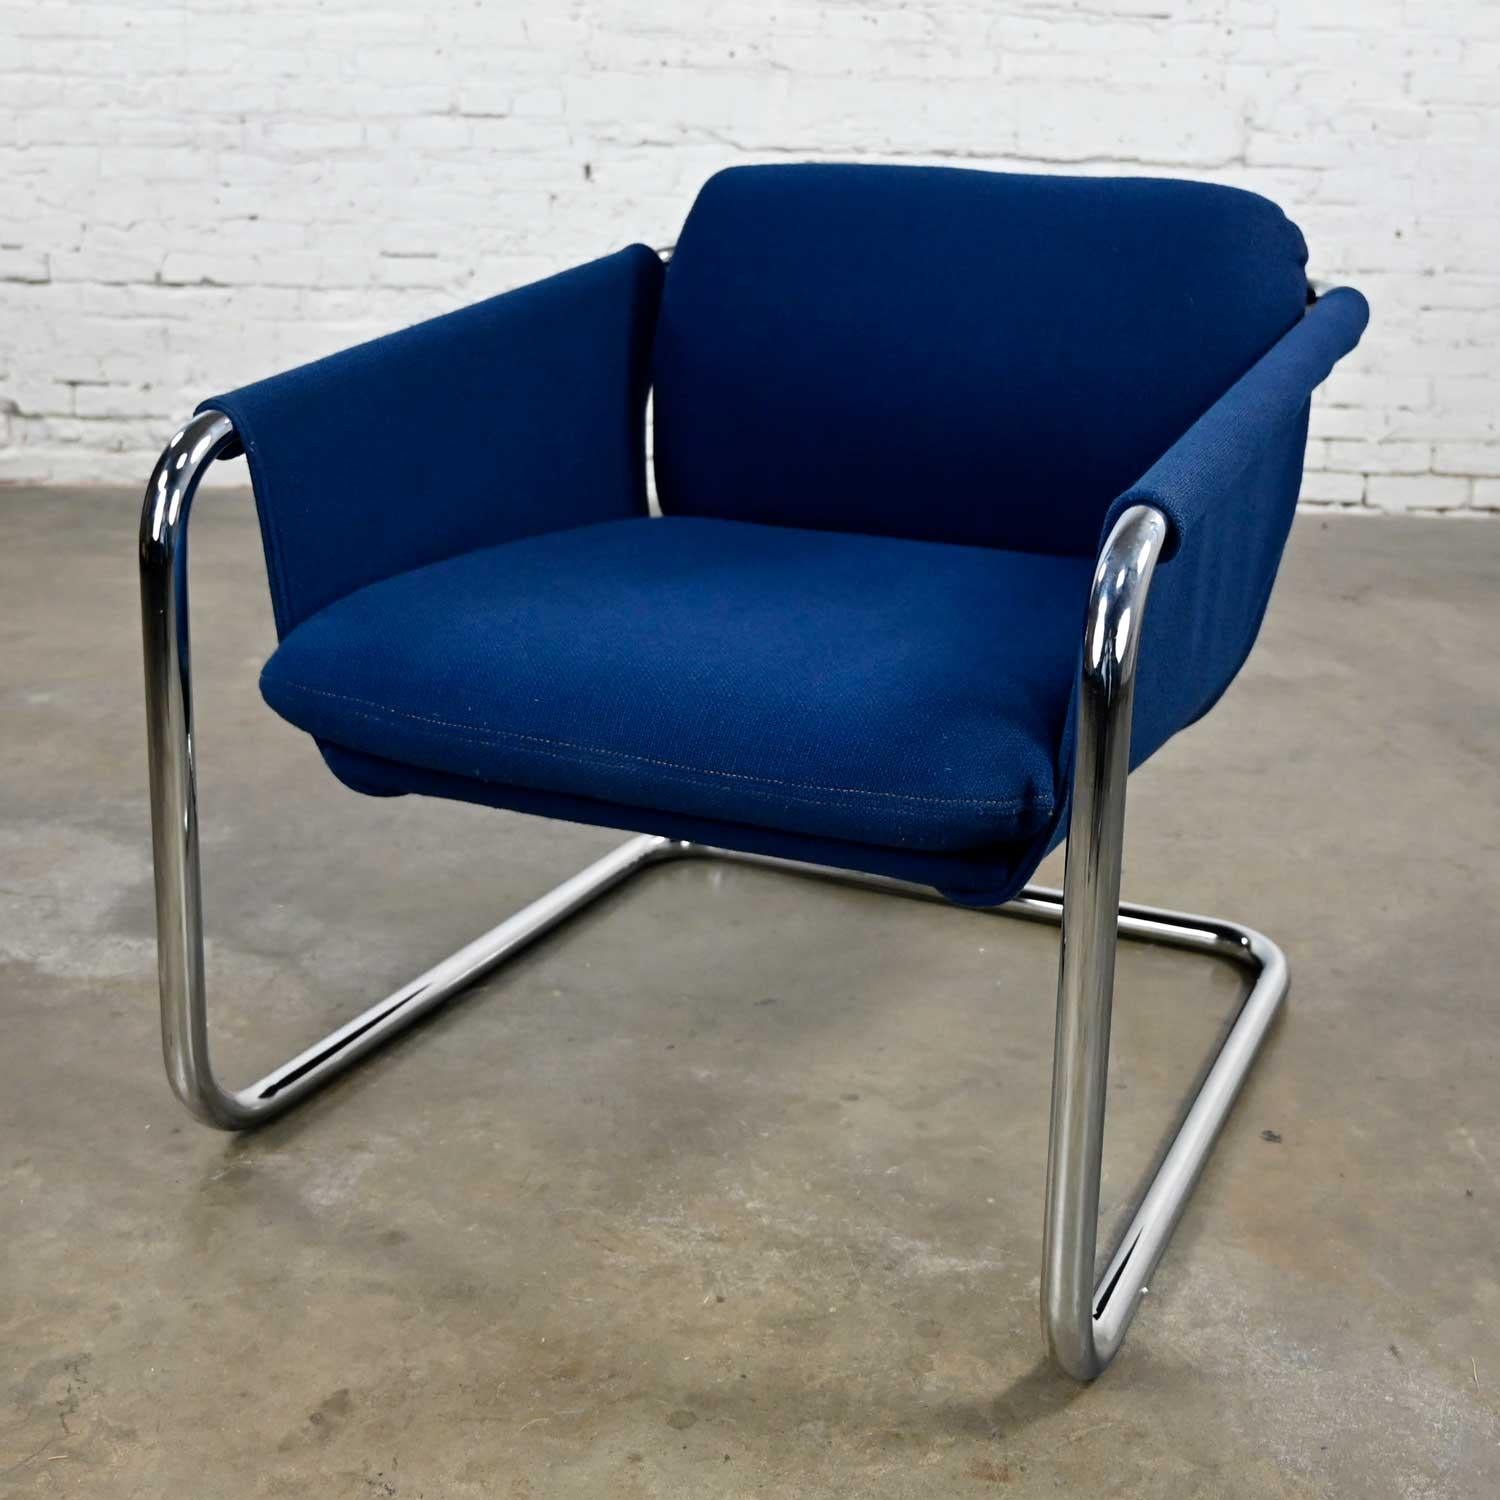 20th Century Vintage Modern Royal Blue Hopsacking & Chrome Cantilever Sling Chair For Sale